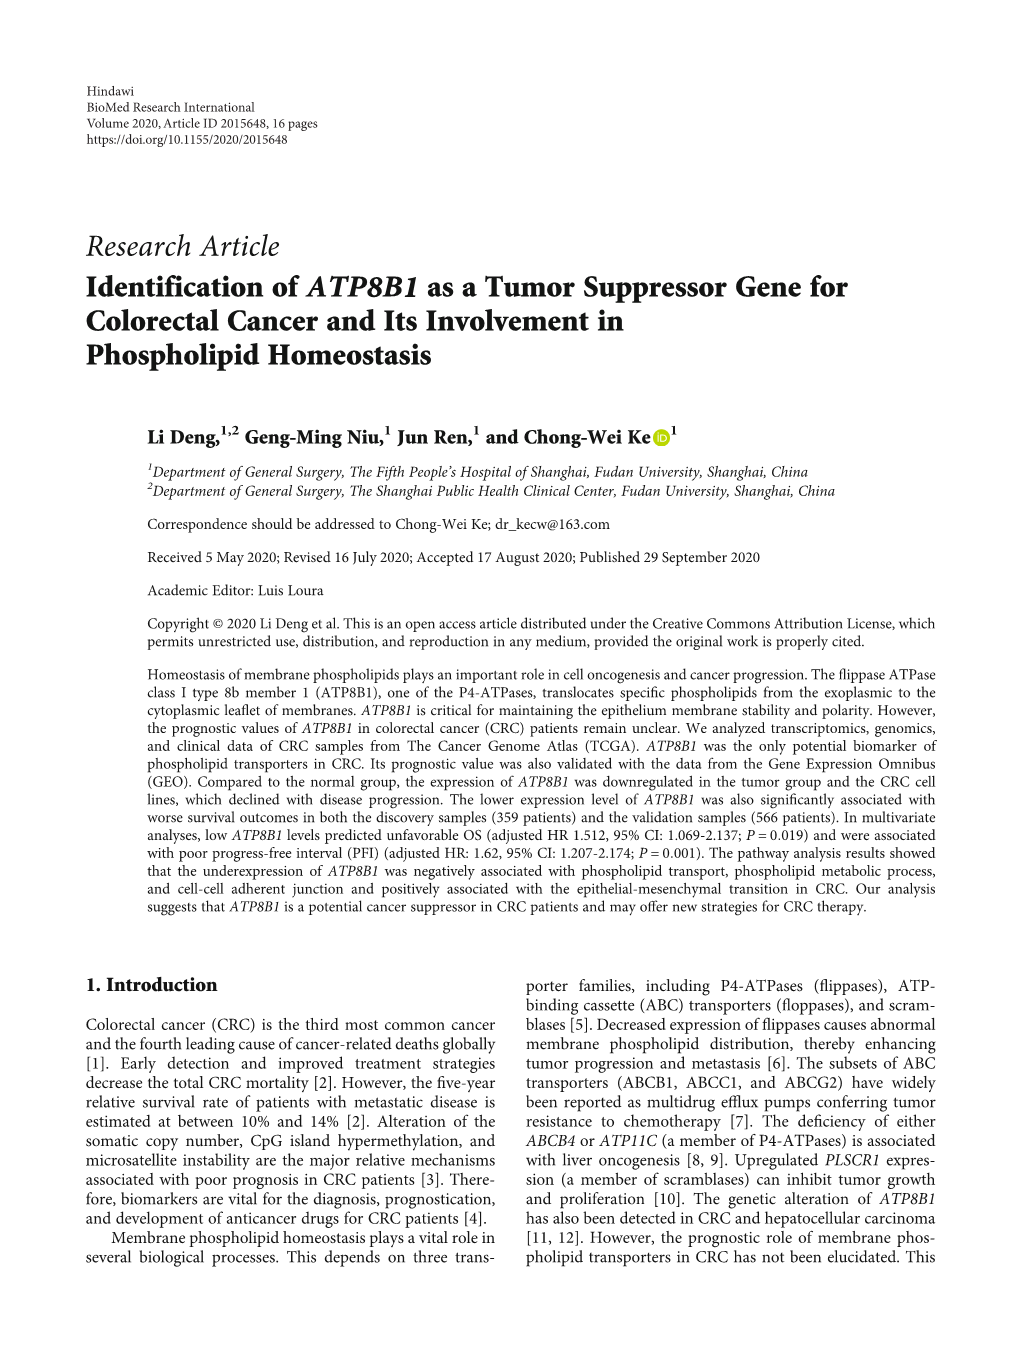 Research Article Identification of ATP8B1 As a Tumor Suppressor Gene for Colorectal Cancer and Its Involvement in Phospholipid Homeostasis